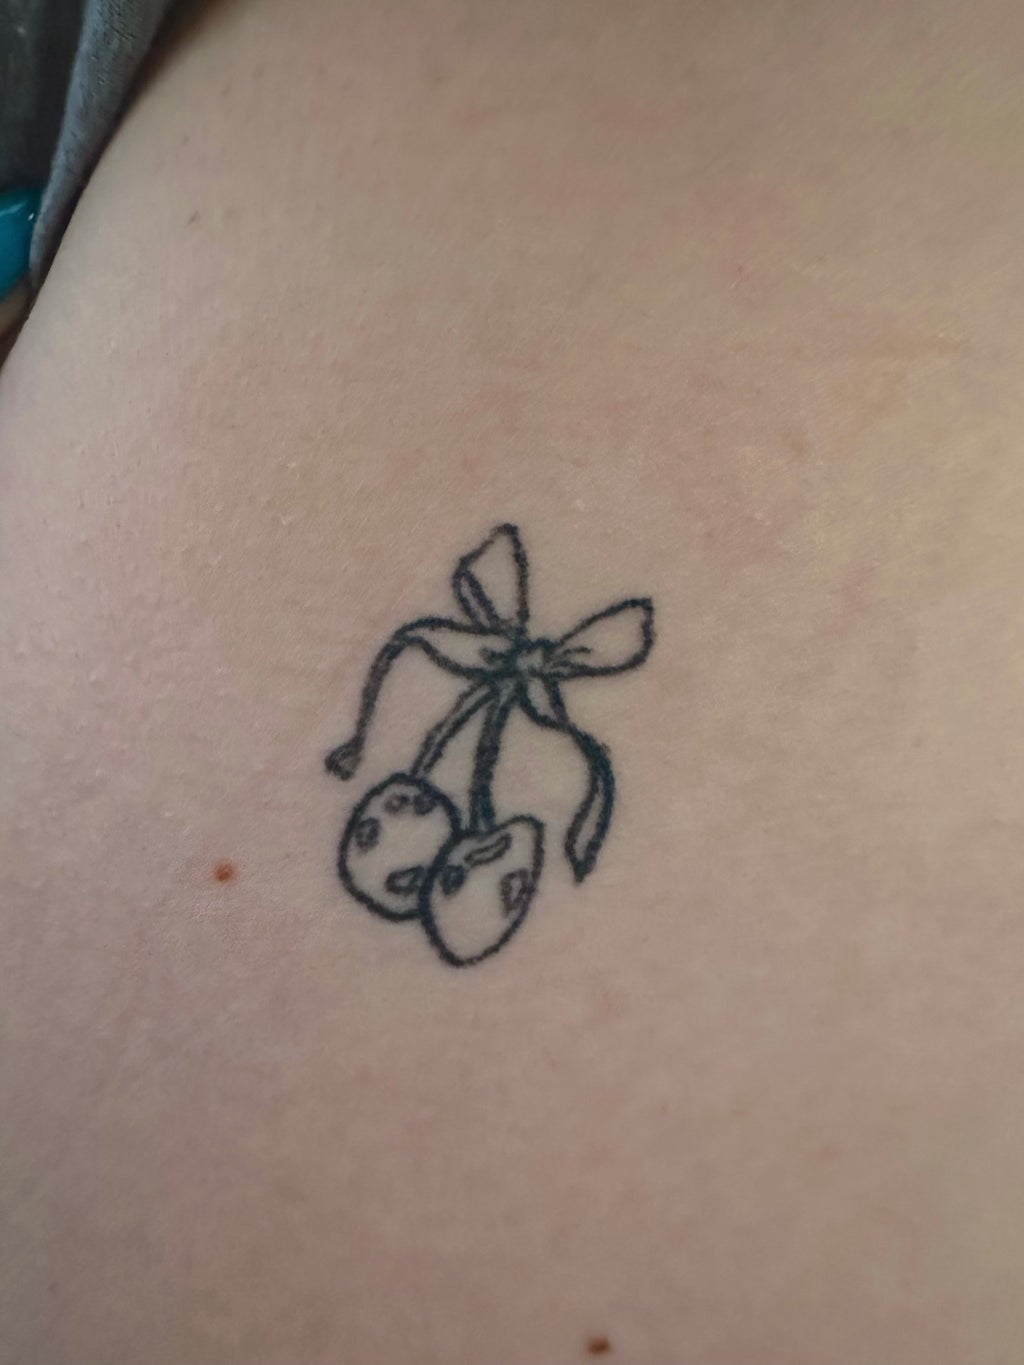 cherries with bow tattoo on left side of rib cage